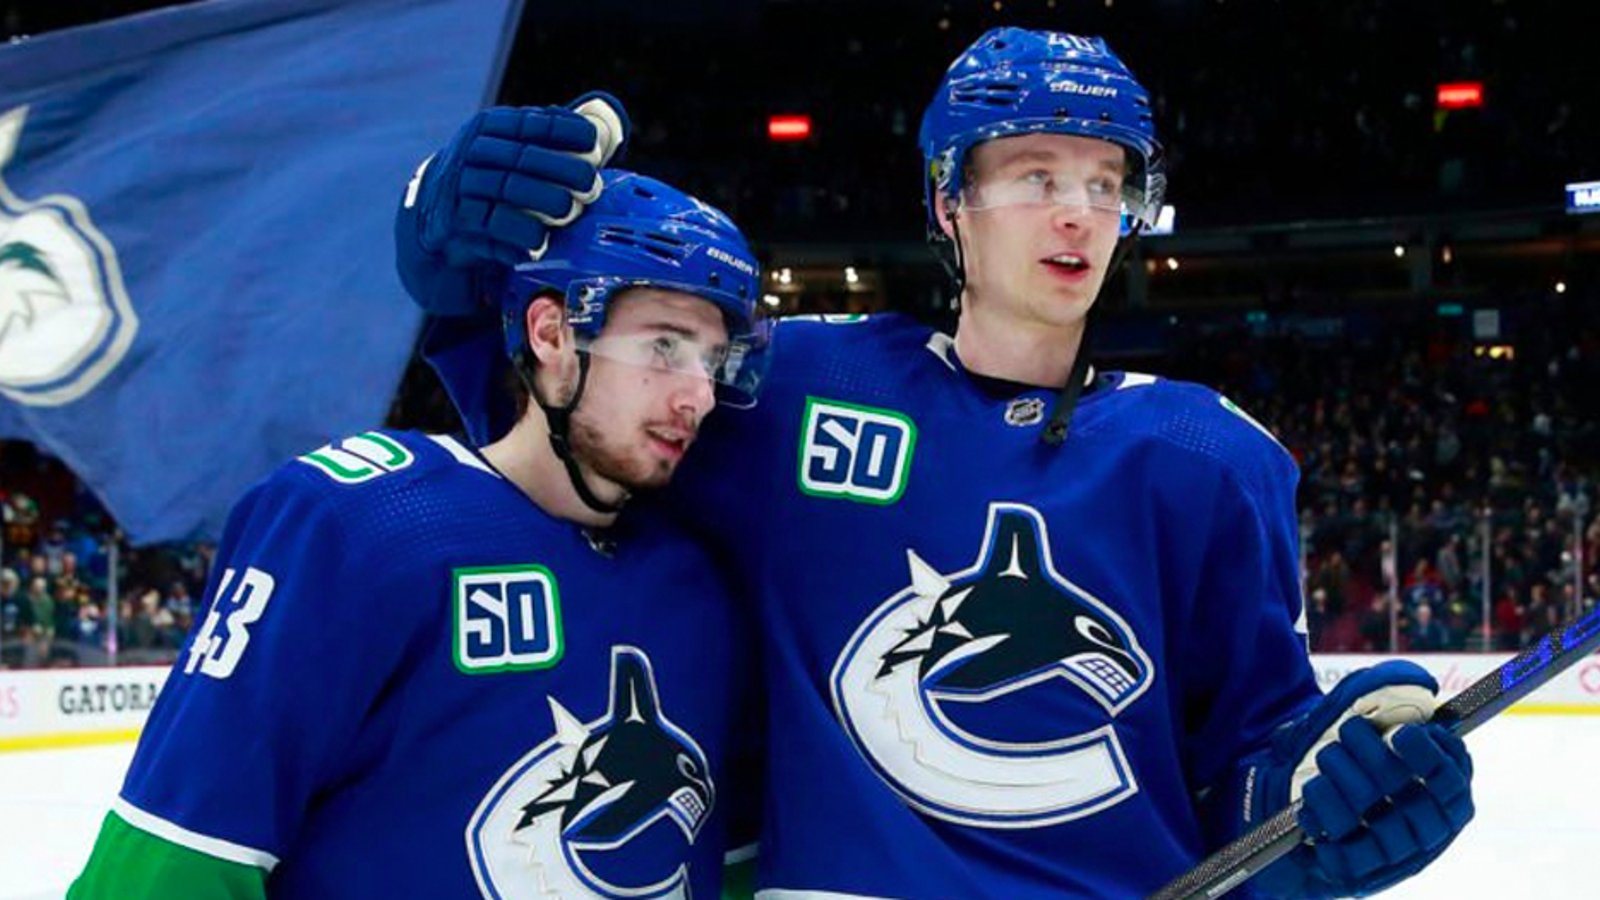 JP Barry, agent for Pettersson and Hughes, talks about contract negotiations and things do NOT look good for the Canucks